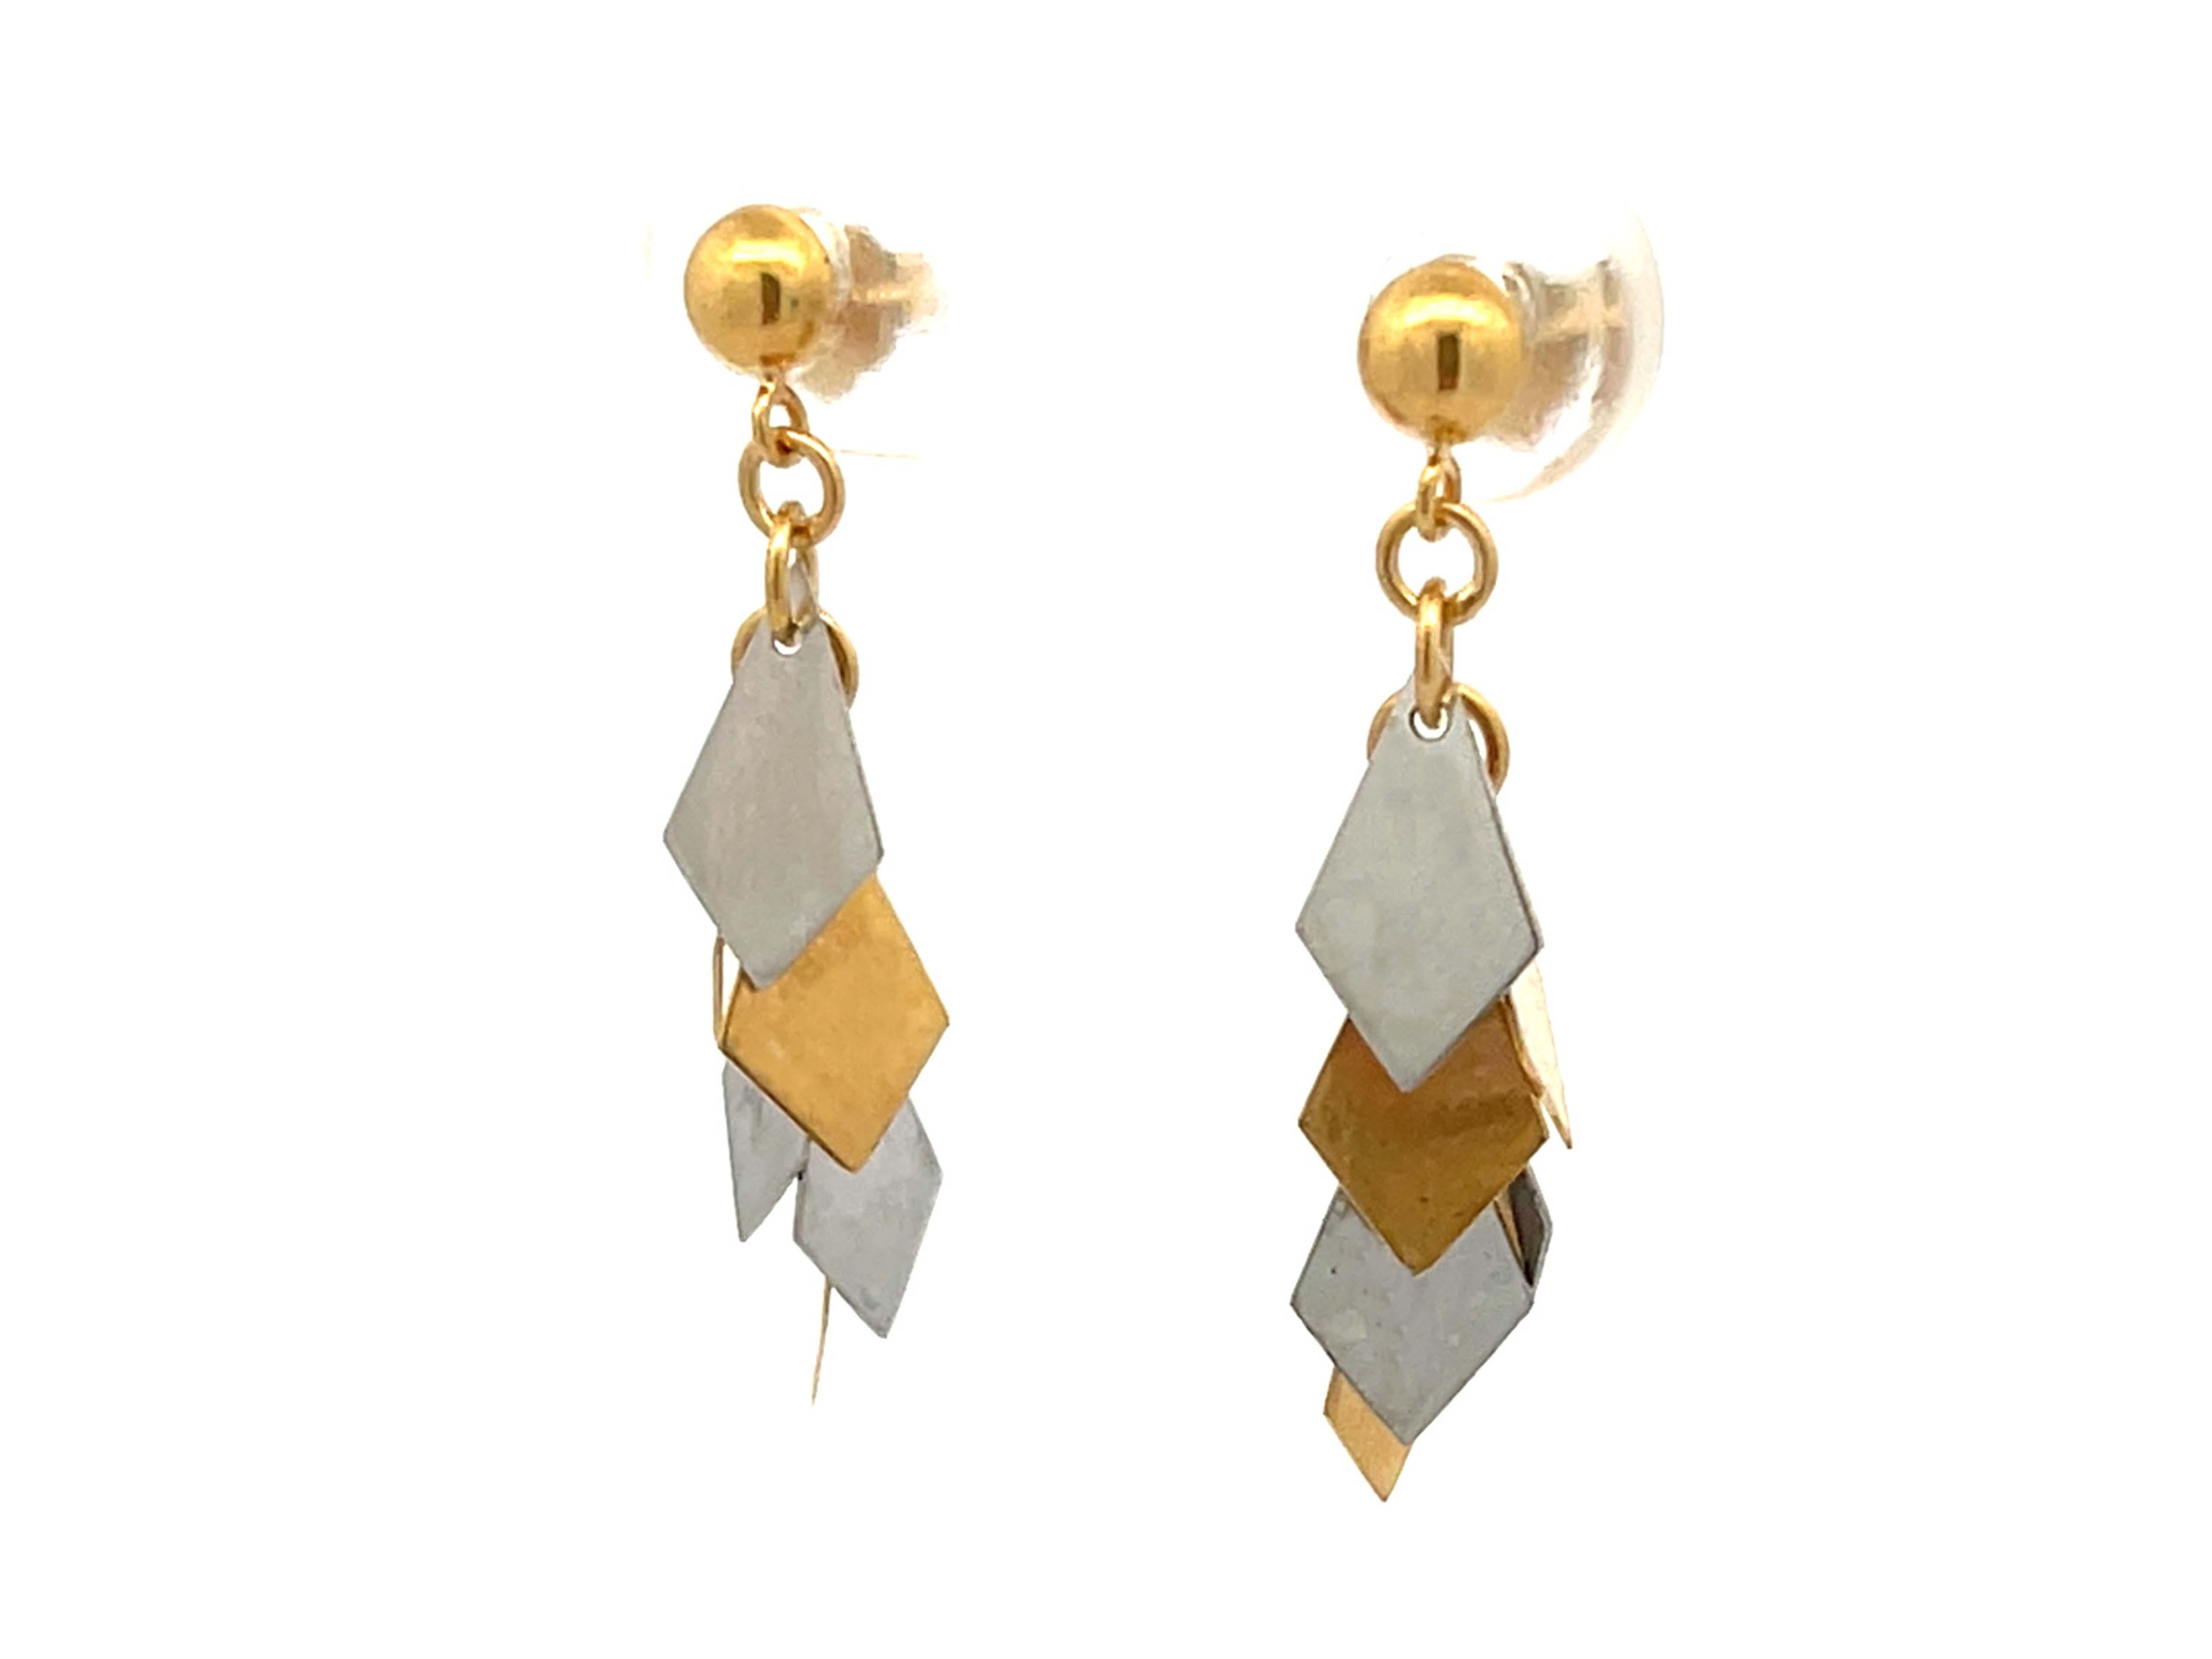 Two Toned Kite Shaped Dangly Earrings in Platinum and 18k Yellow Gold In Excellent Condition For Sale In Honolulu, HI